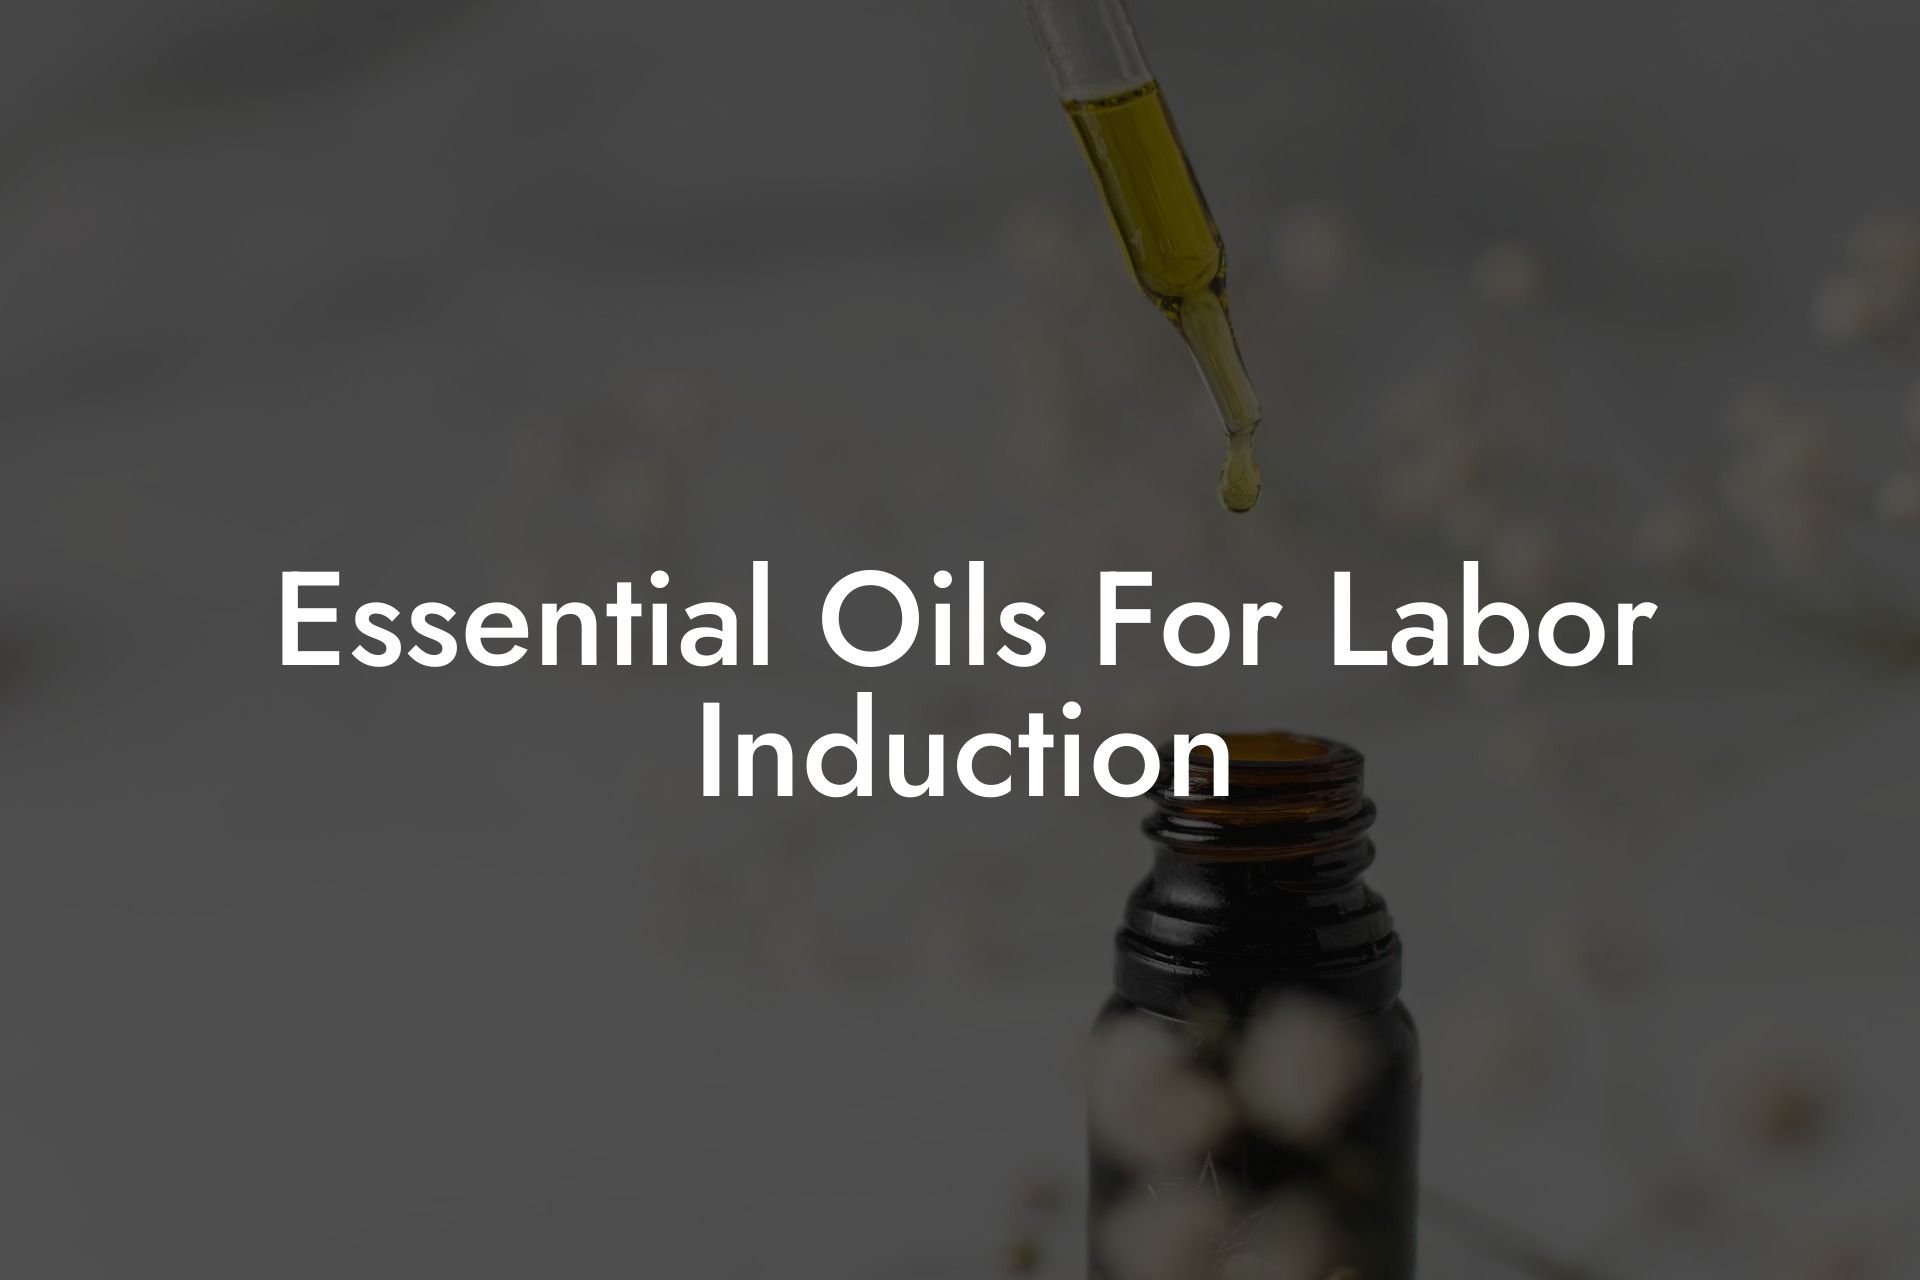 Essential Oils For Labor Induction